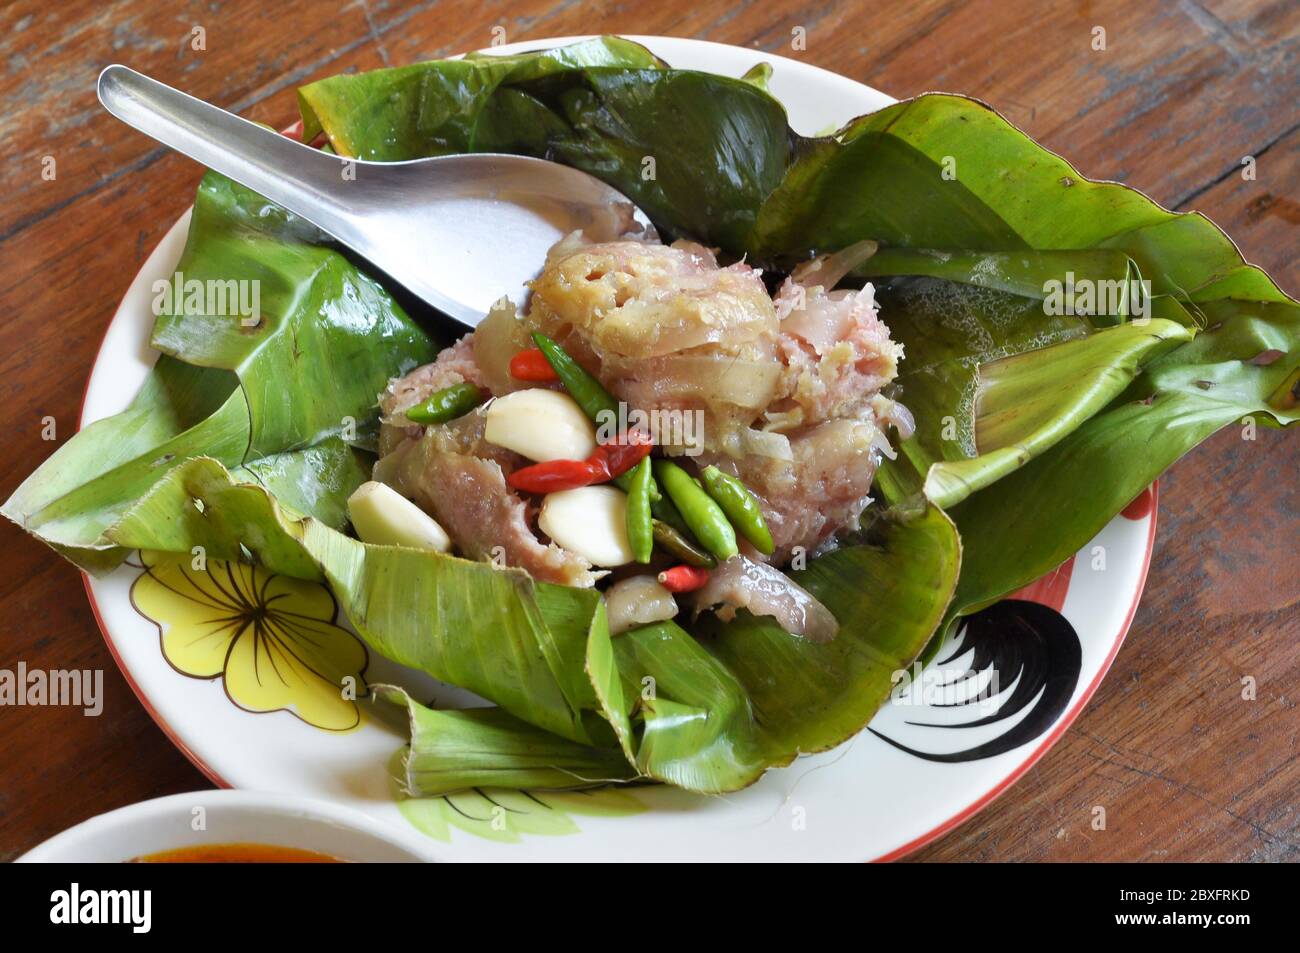 Sour pork or Nham is a popular native foods commonly consumed in the local the north of Thailand. Stock Photo